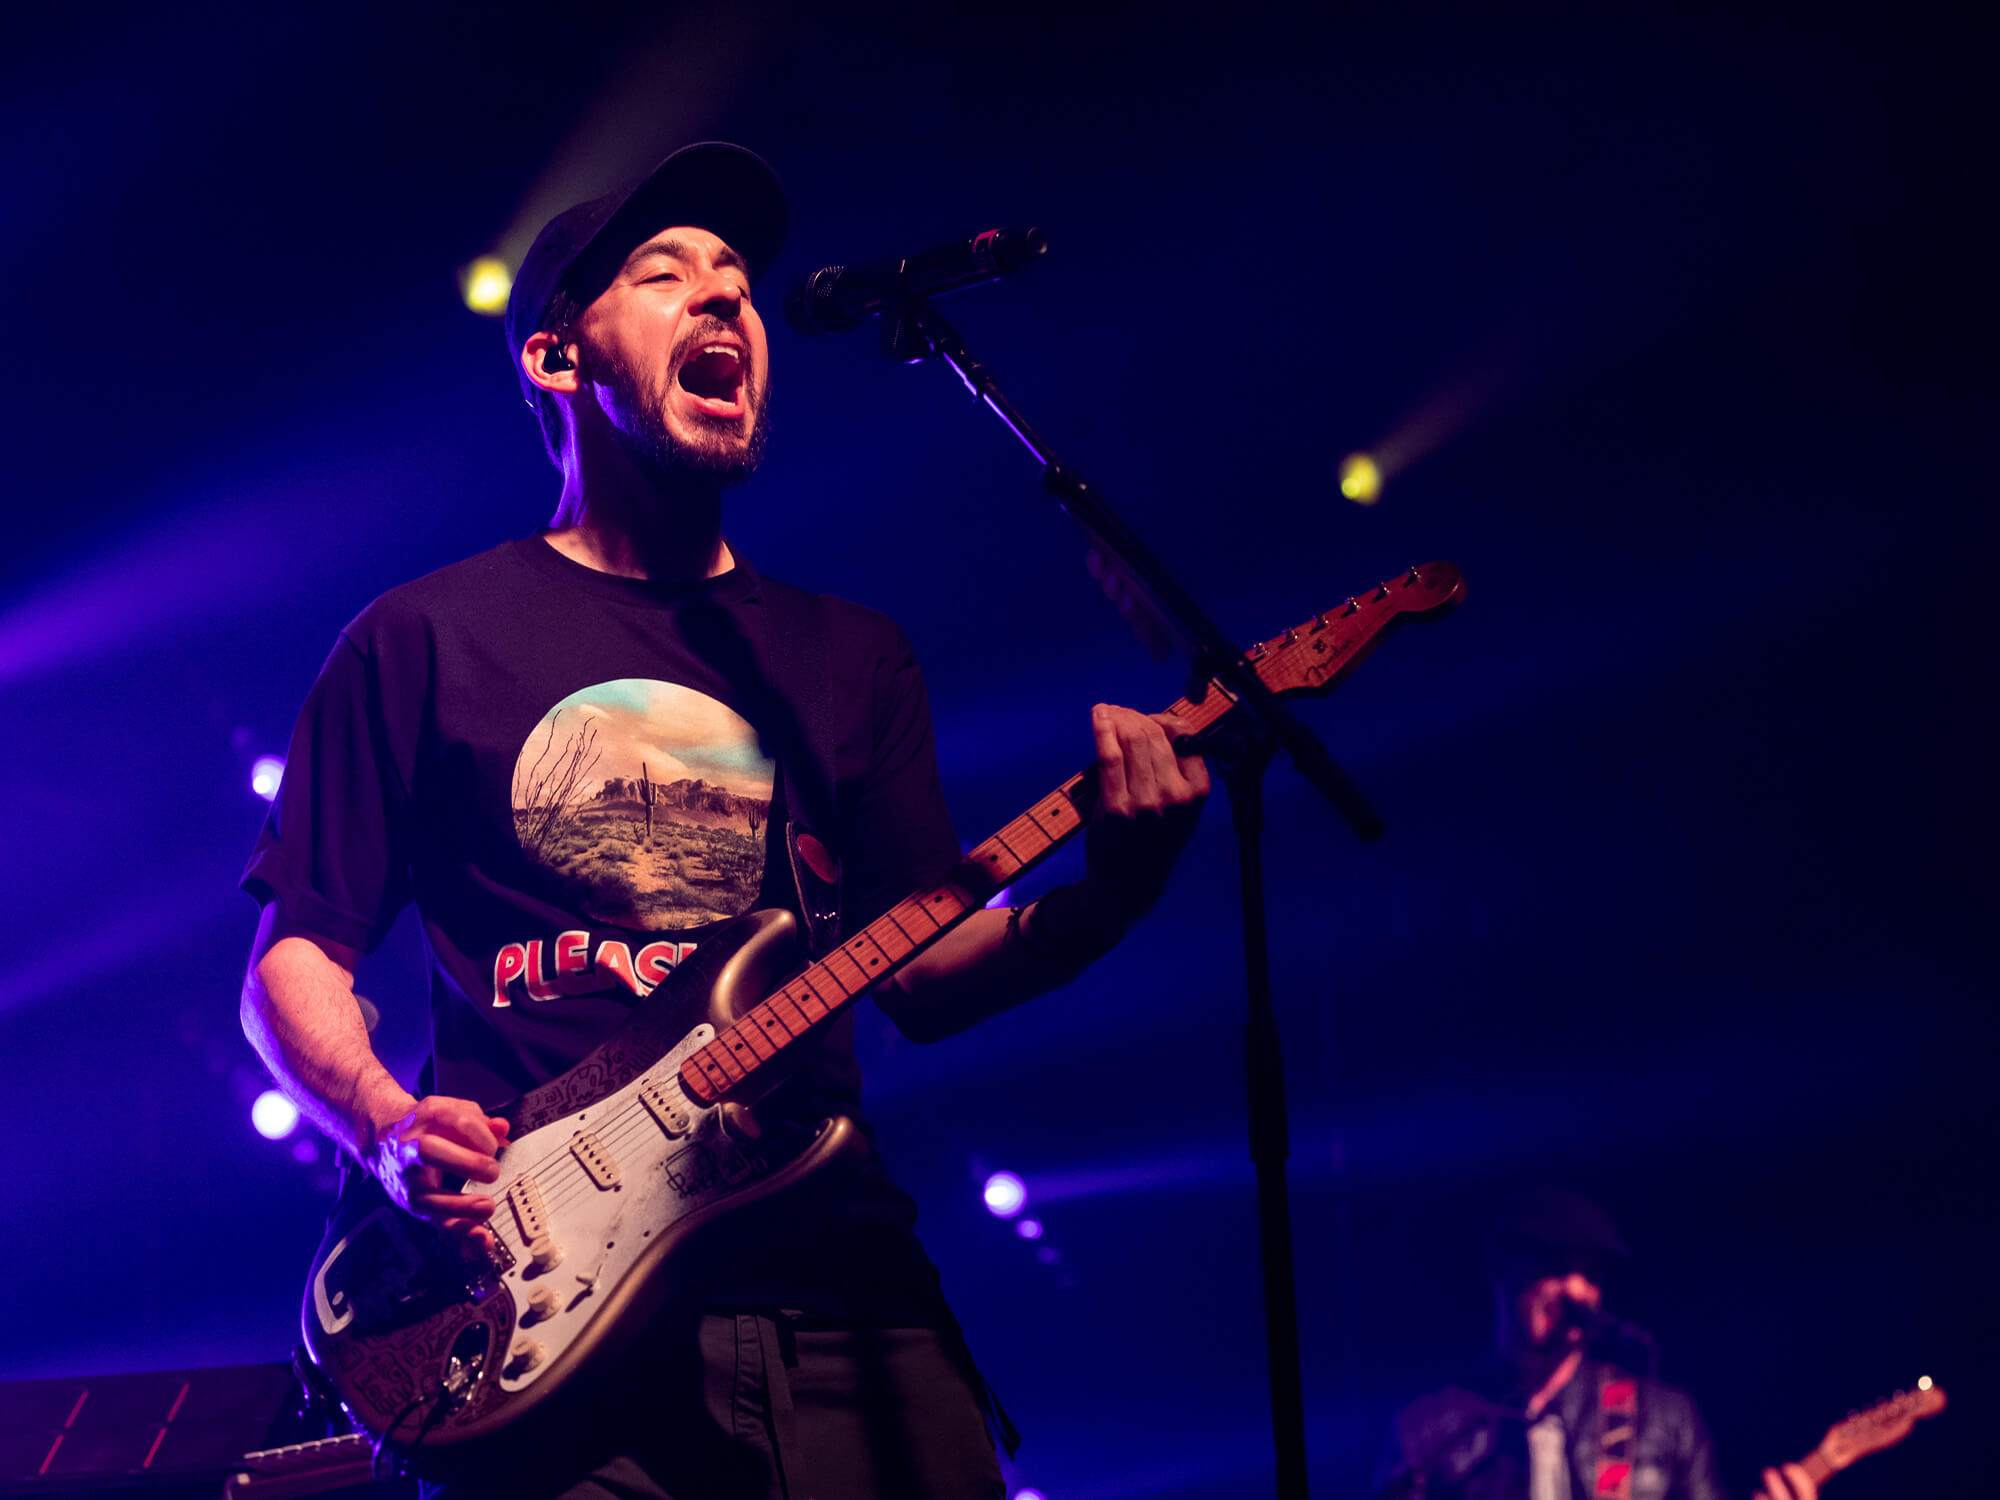 Mike Shinoda on stage. He is playing a Strat and is singing into a mic. He is wearing a dark coloured cap and t-shirt.